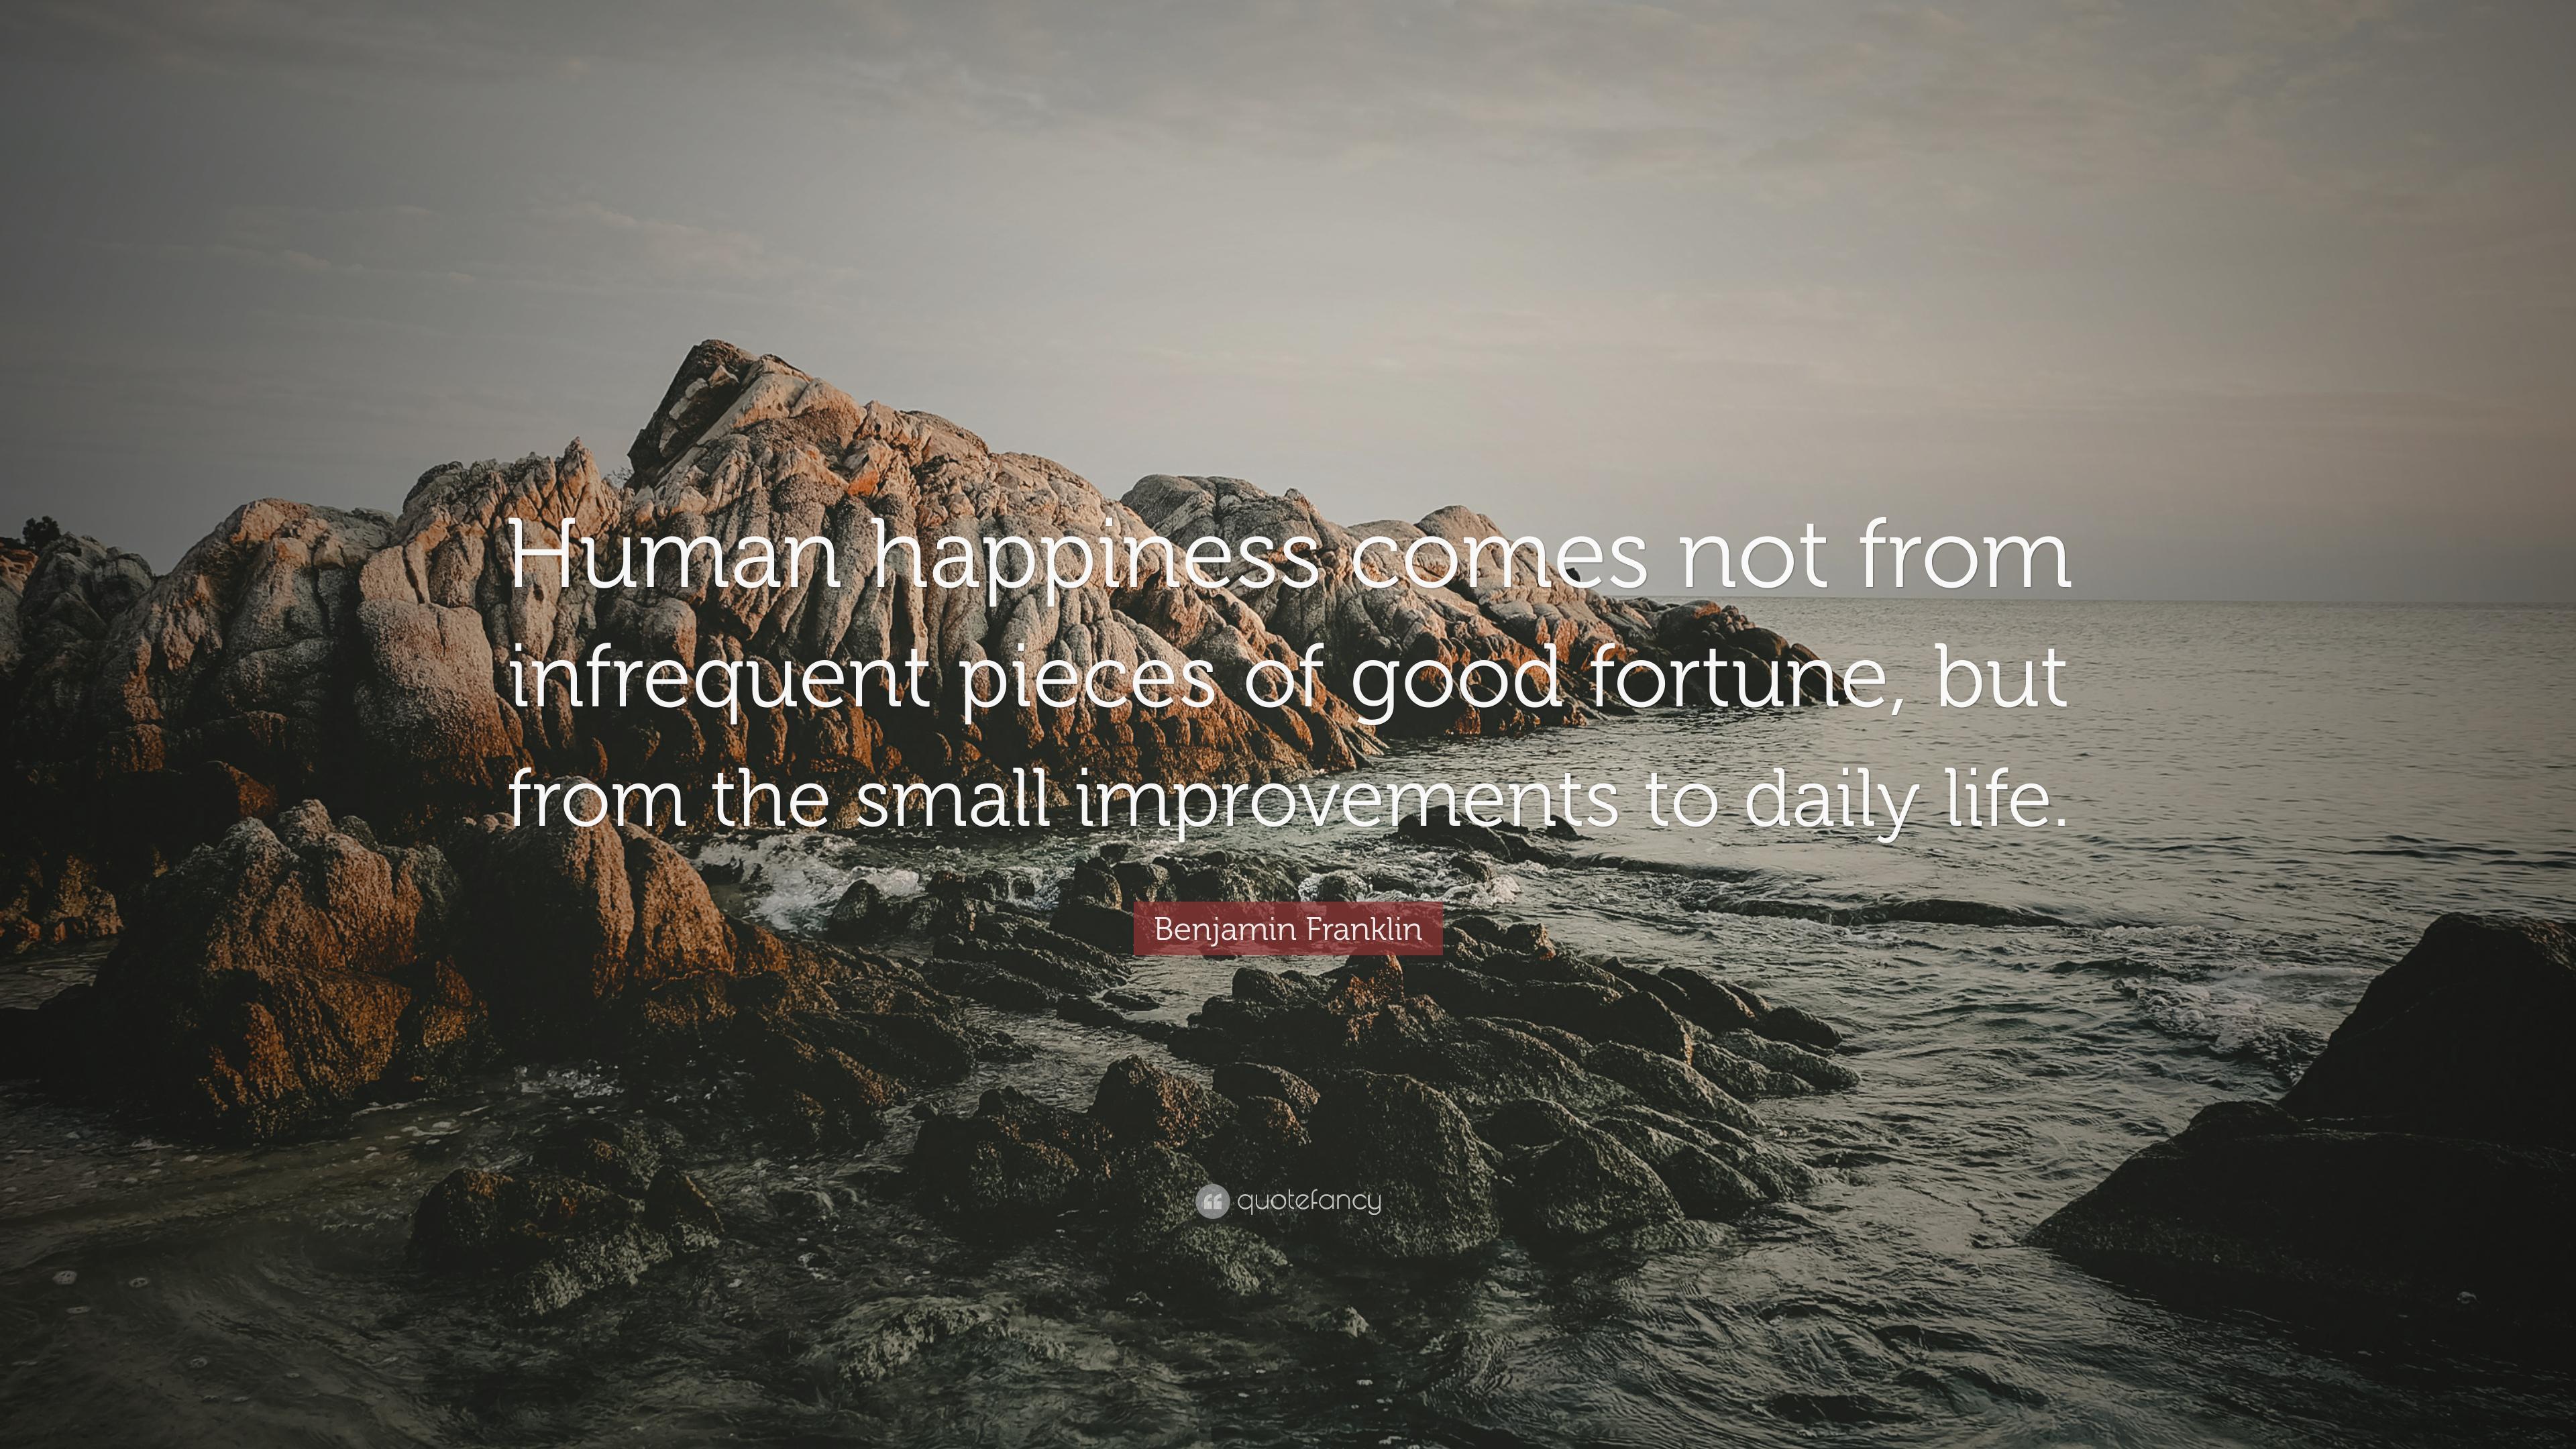 Benjamin Franklin Quote: “Human happiness comes not